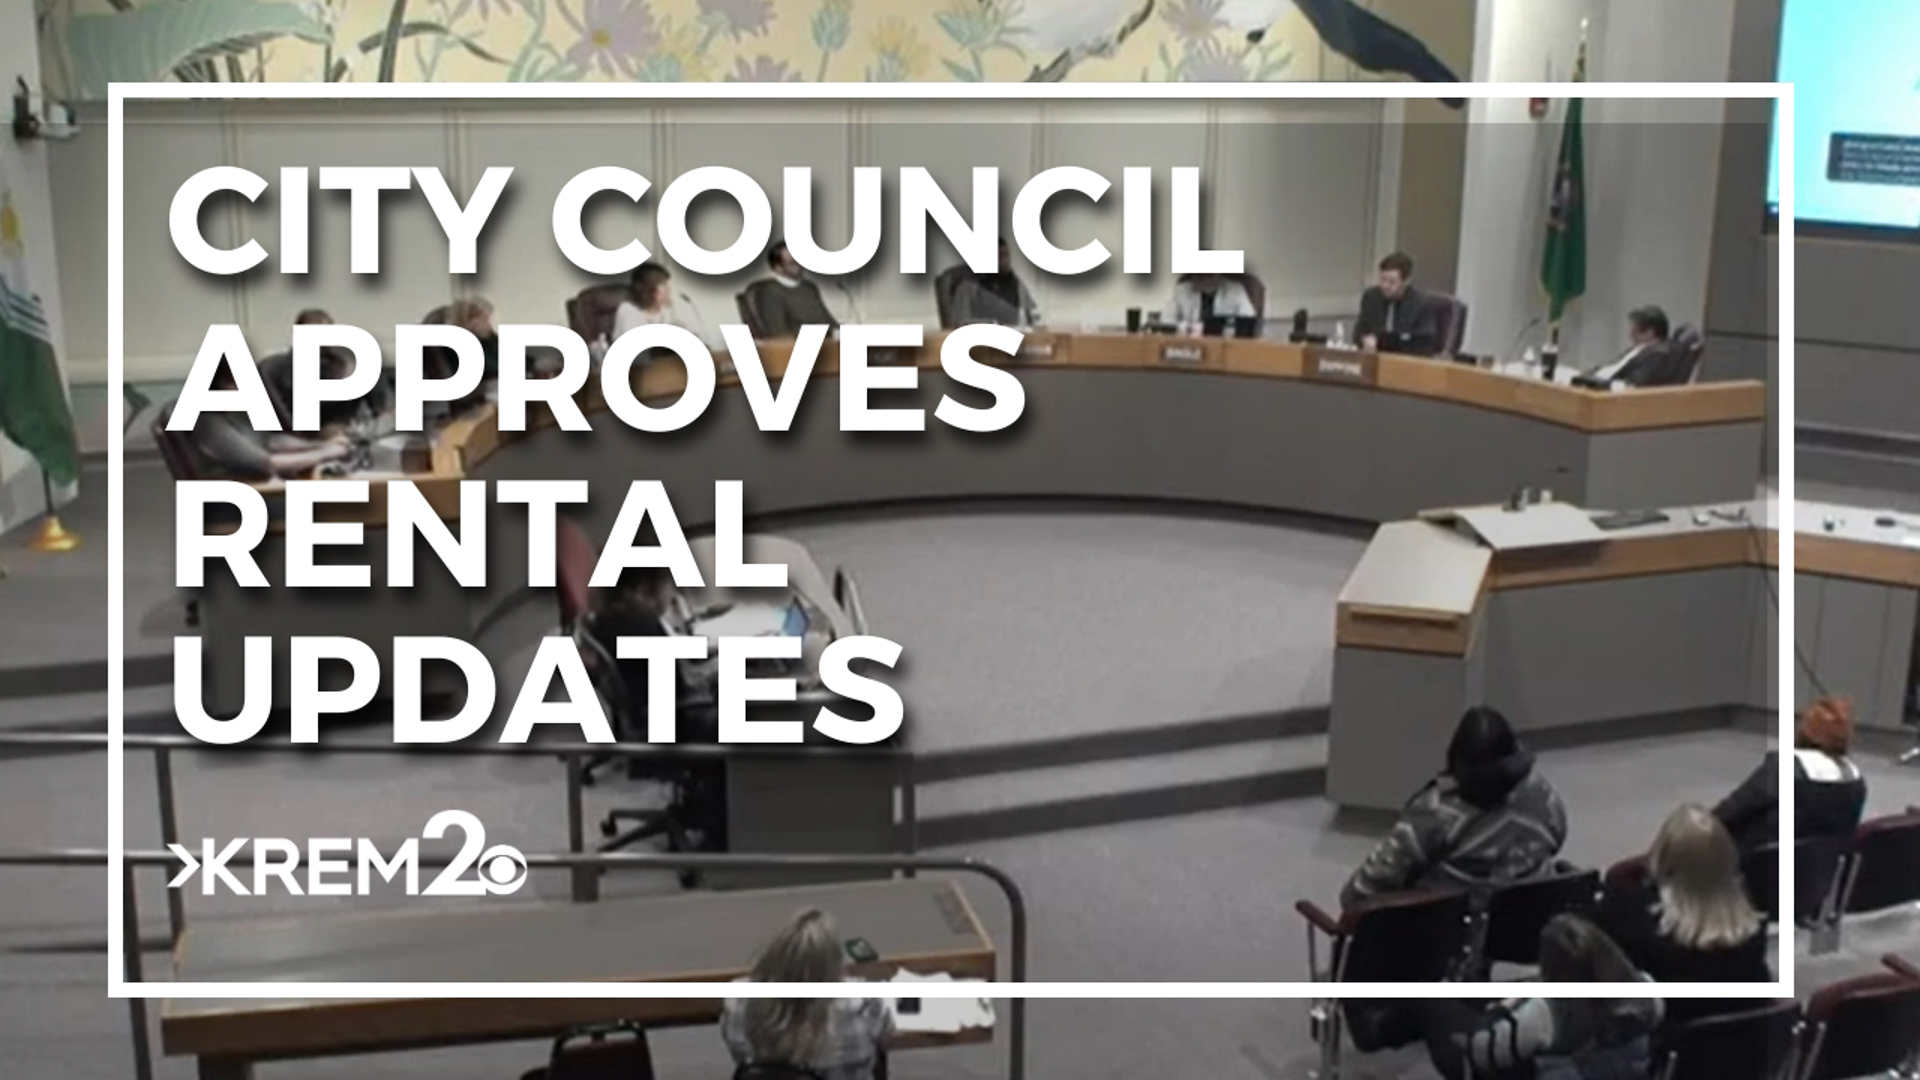 The decision came after a four-hour long discussion between council members and community members.